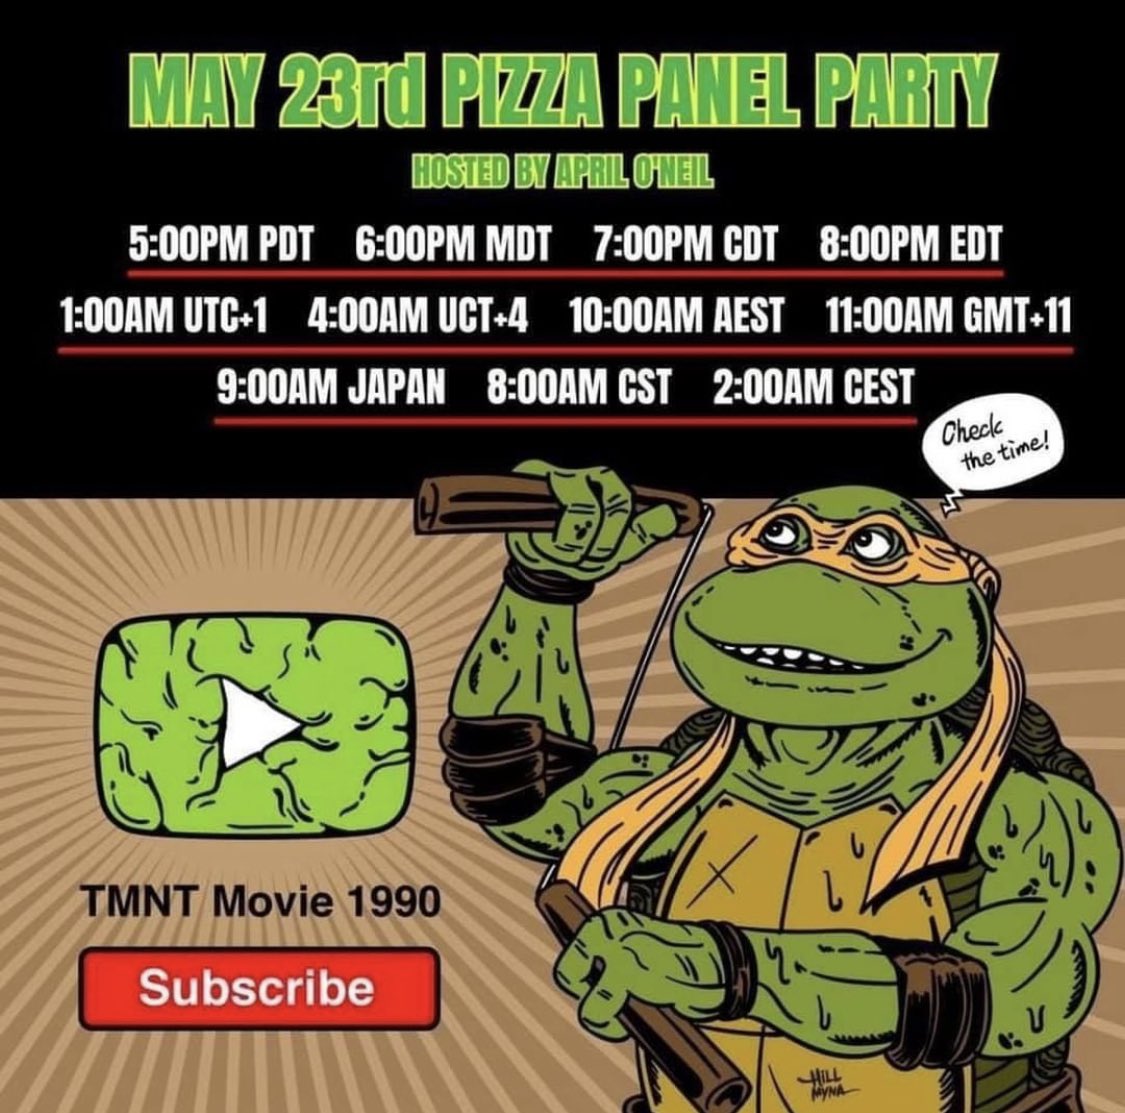 Here’s one for fans of the original #teenagemutantninjaturtles movie 🎥 
Tomorrow morning at 10am AEST, the original #apriloneil #judithhoag is hosting a #pizzapanelparty featuring the original cast members 🍕 
This one is going to be a lot of fun, don’t miss it!!
#greywolf #tmnt